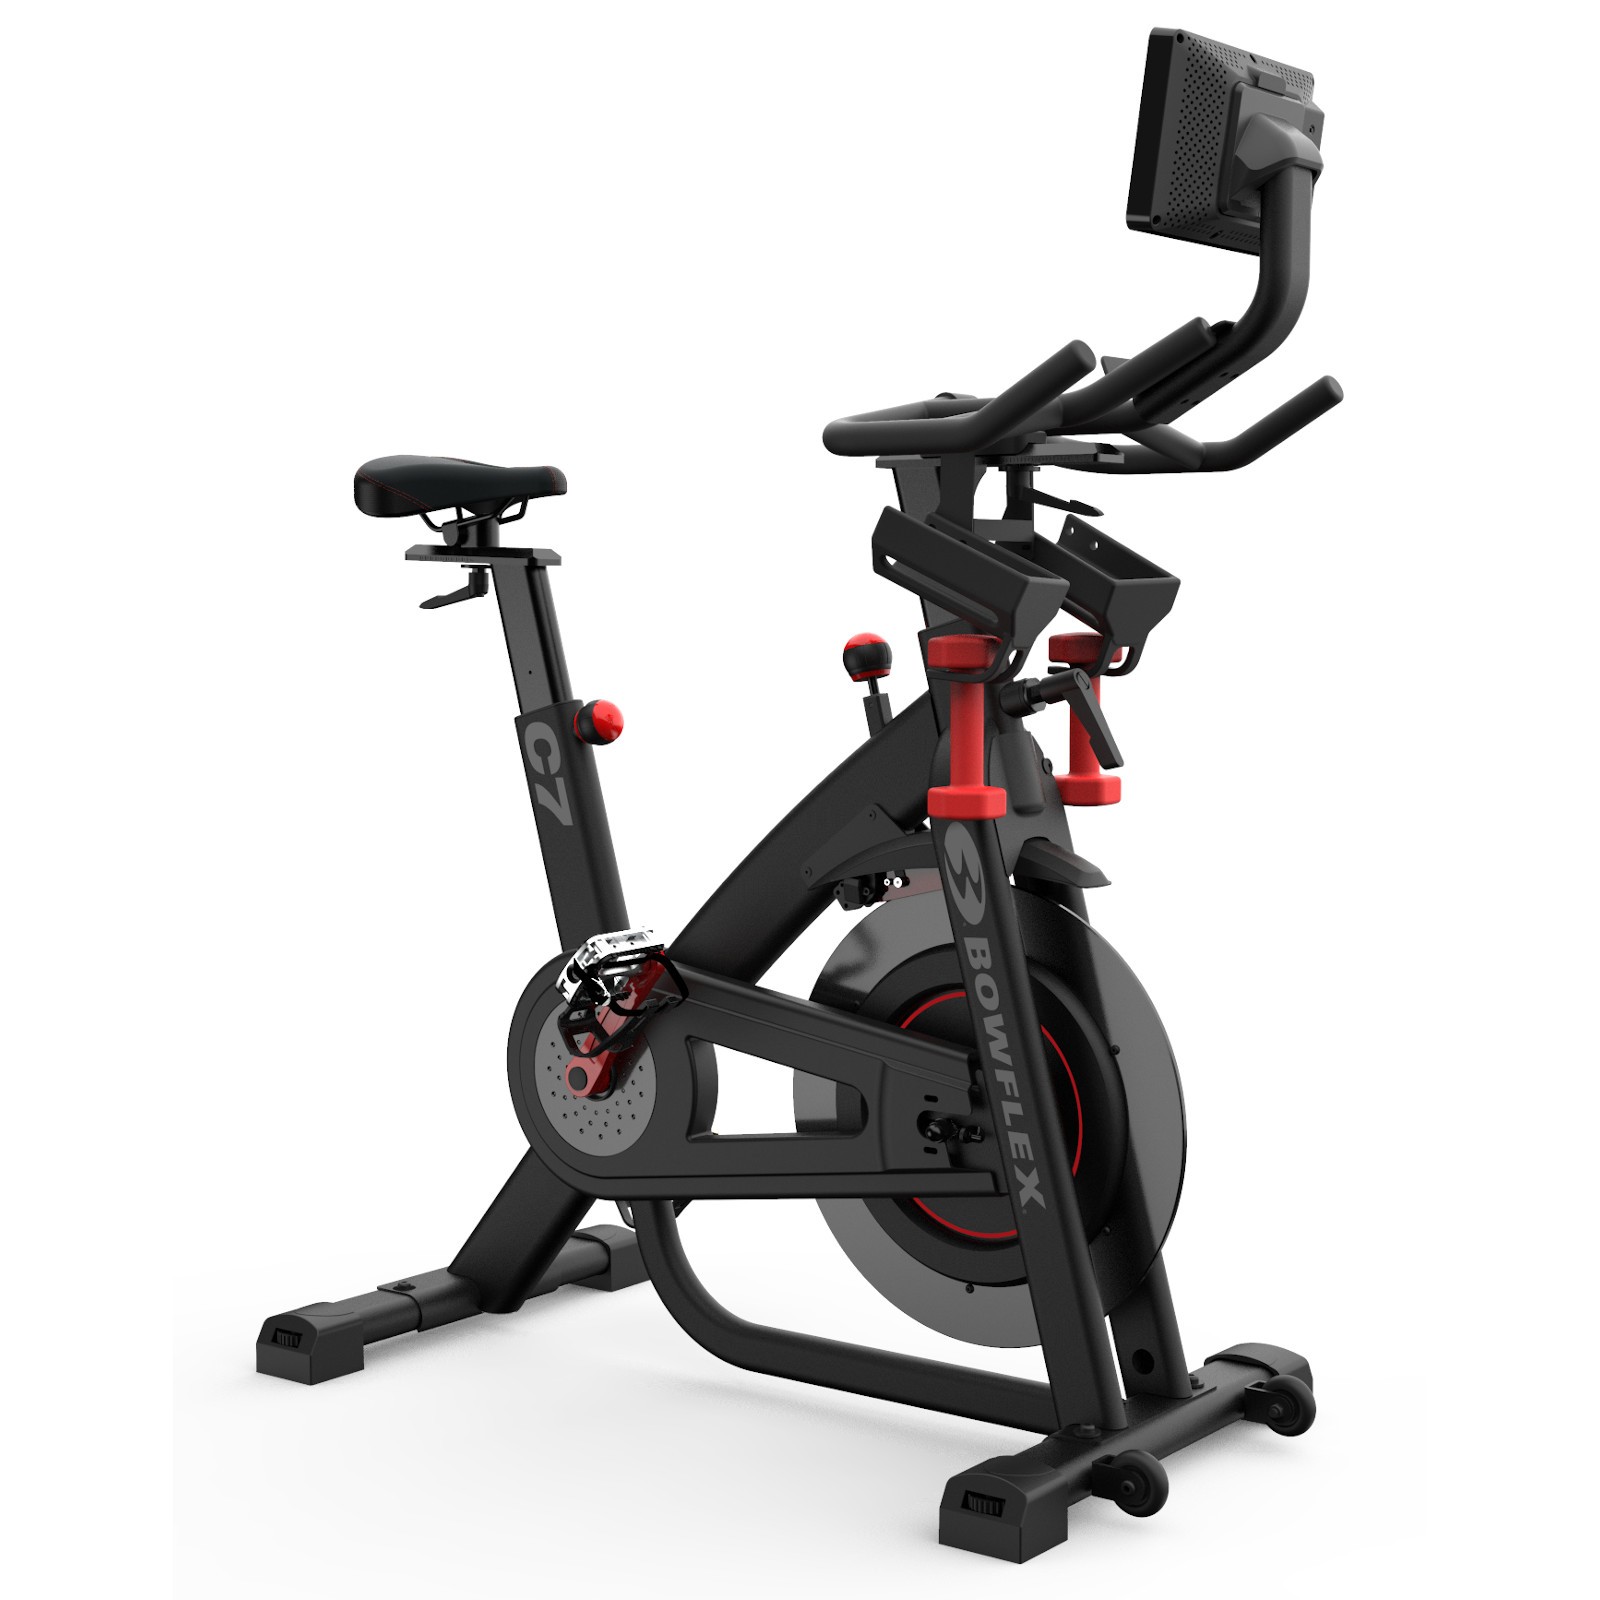 Review of the Bowflex C7 Exercise Bike